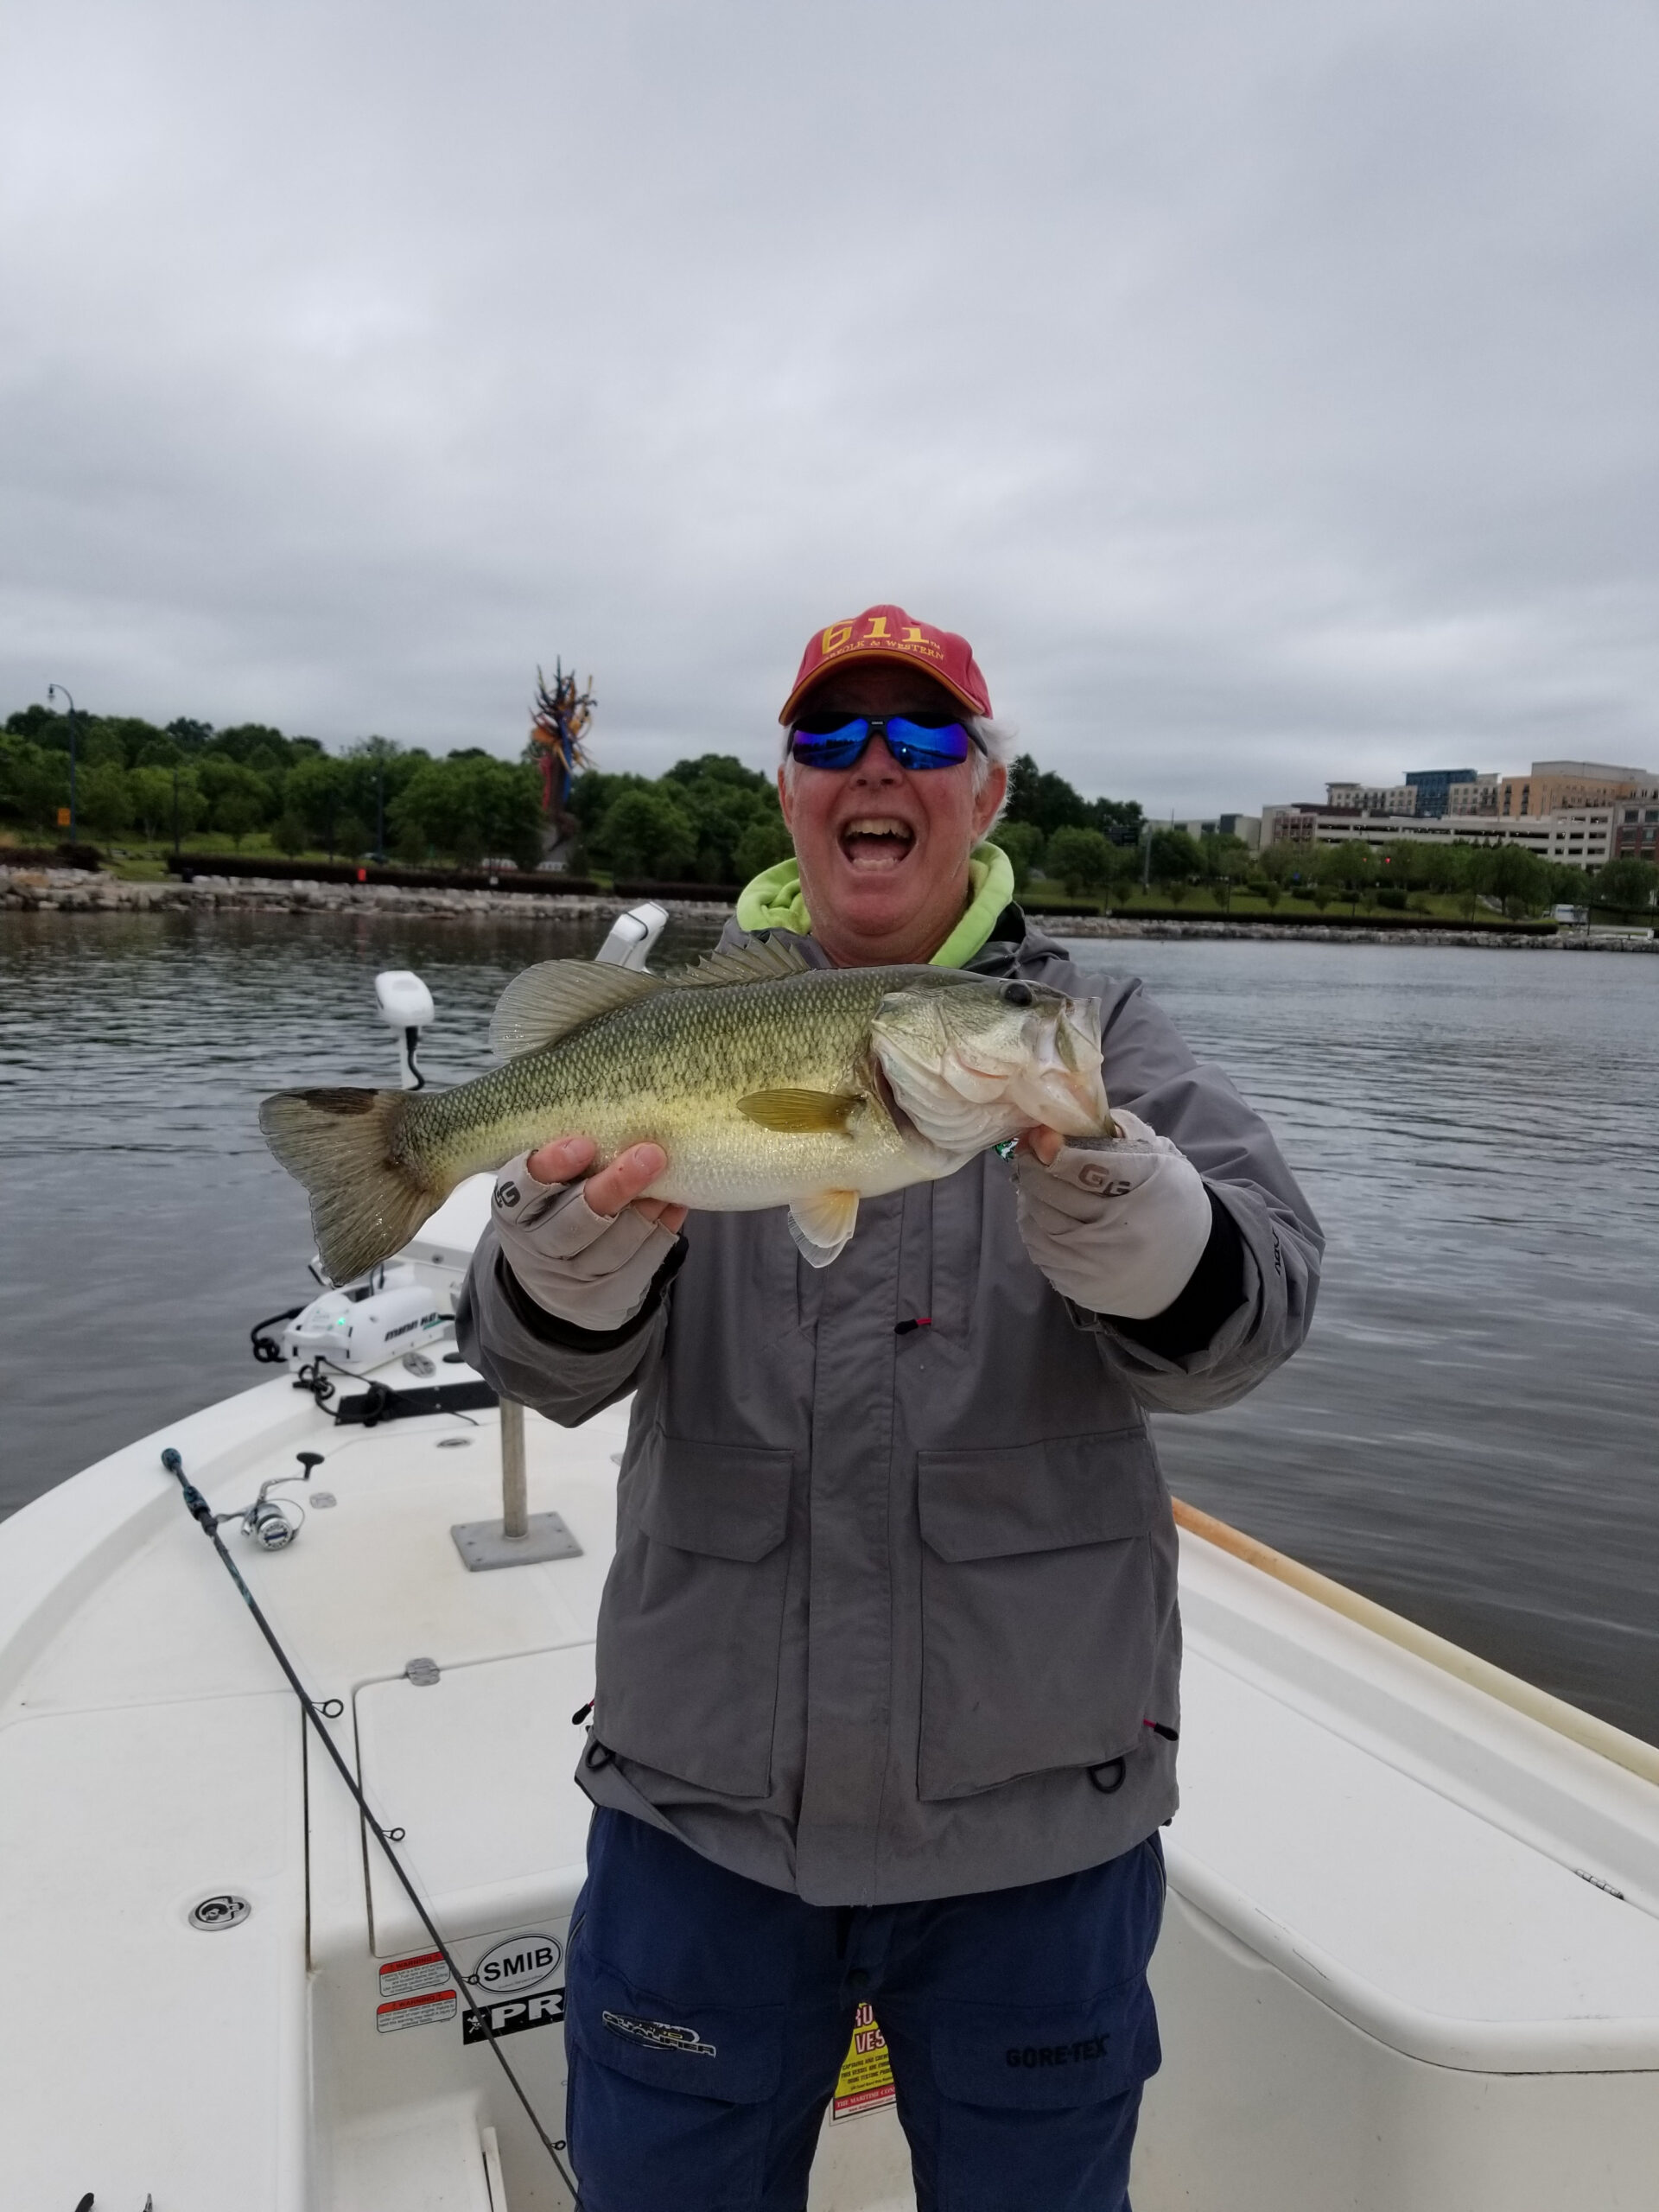 https://indianheadcharters.com/wp-content/uploads/2020/06/6-17-20-3-scaled.jpg